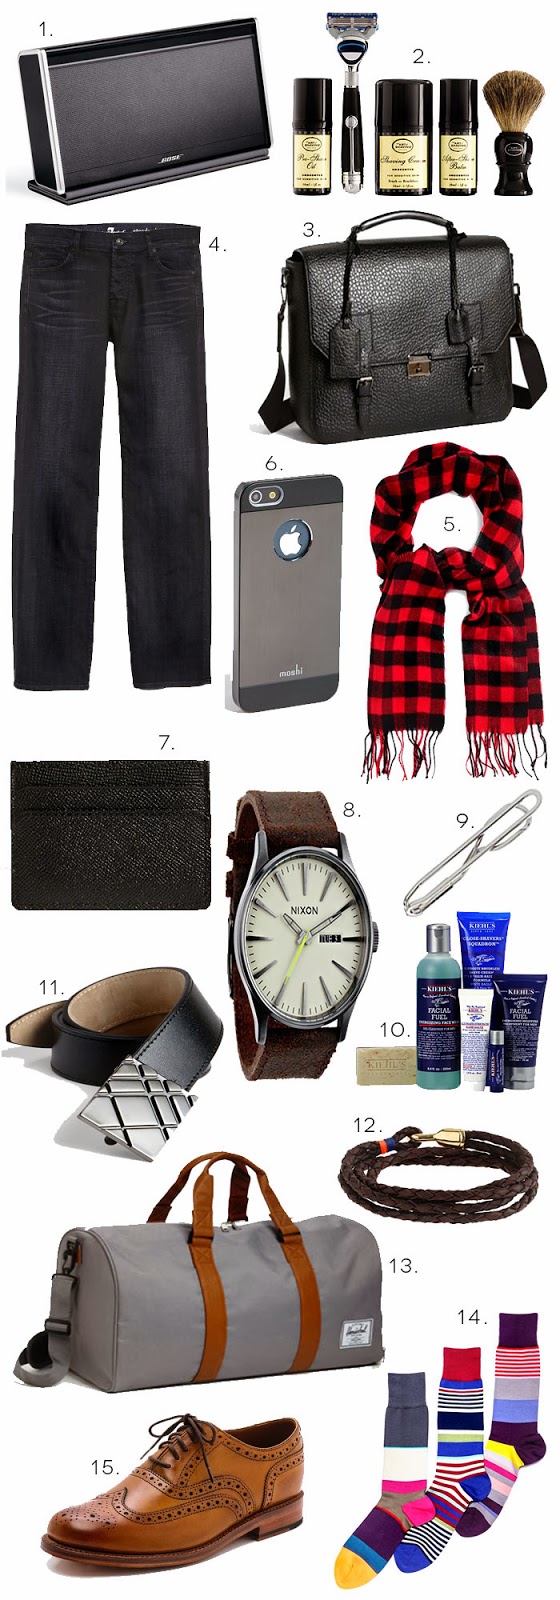 Gift Guide: For Your Man - Dash of Darling